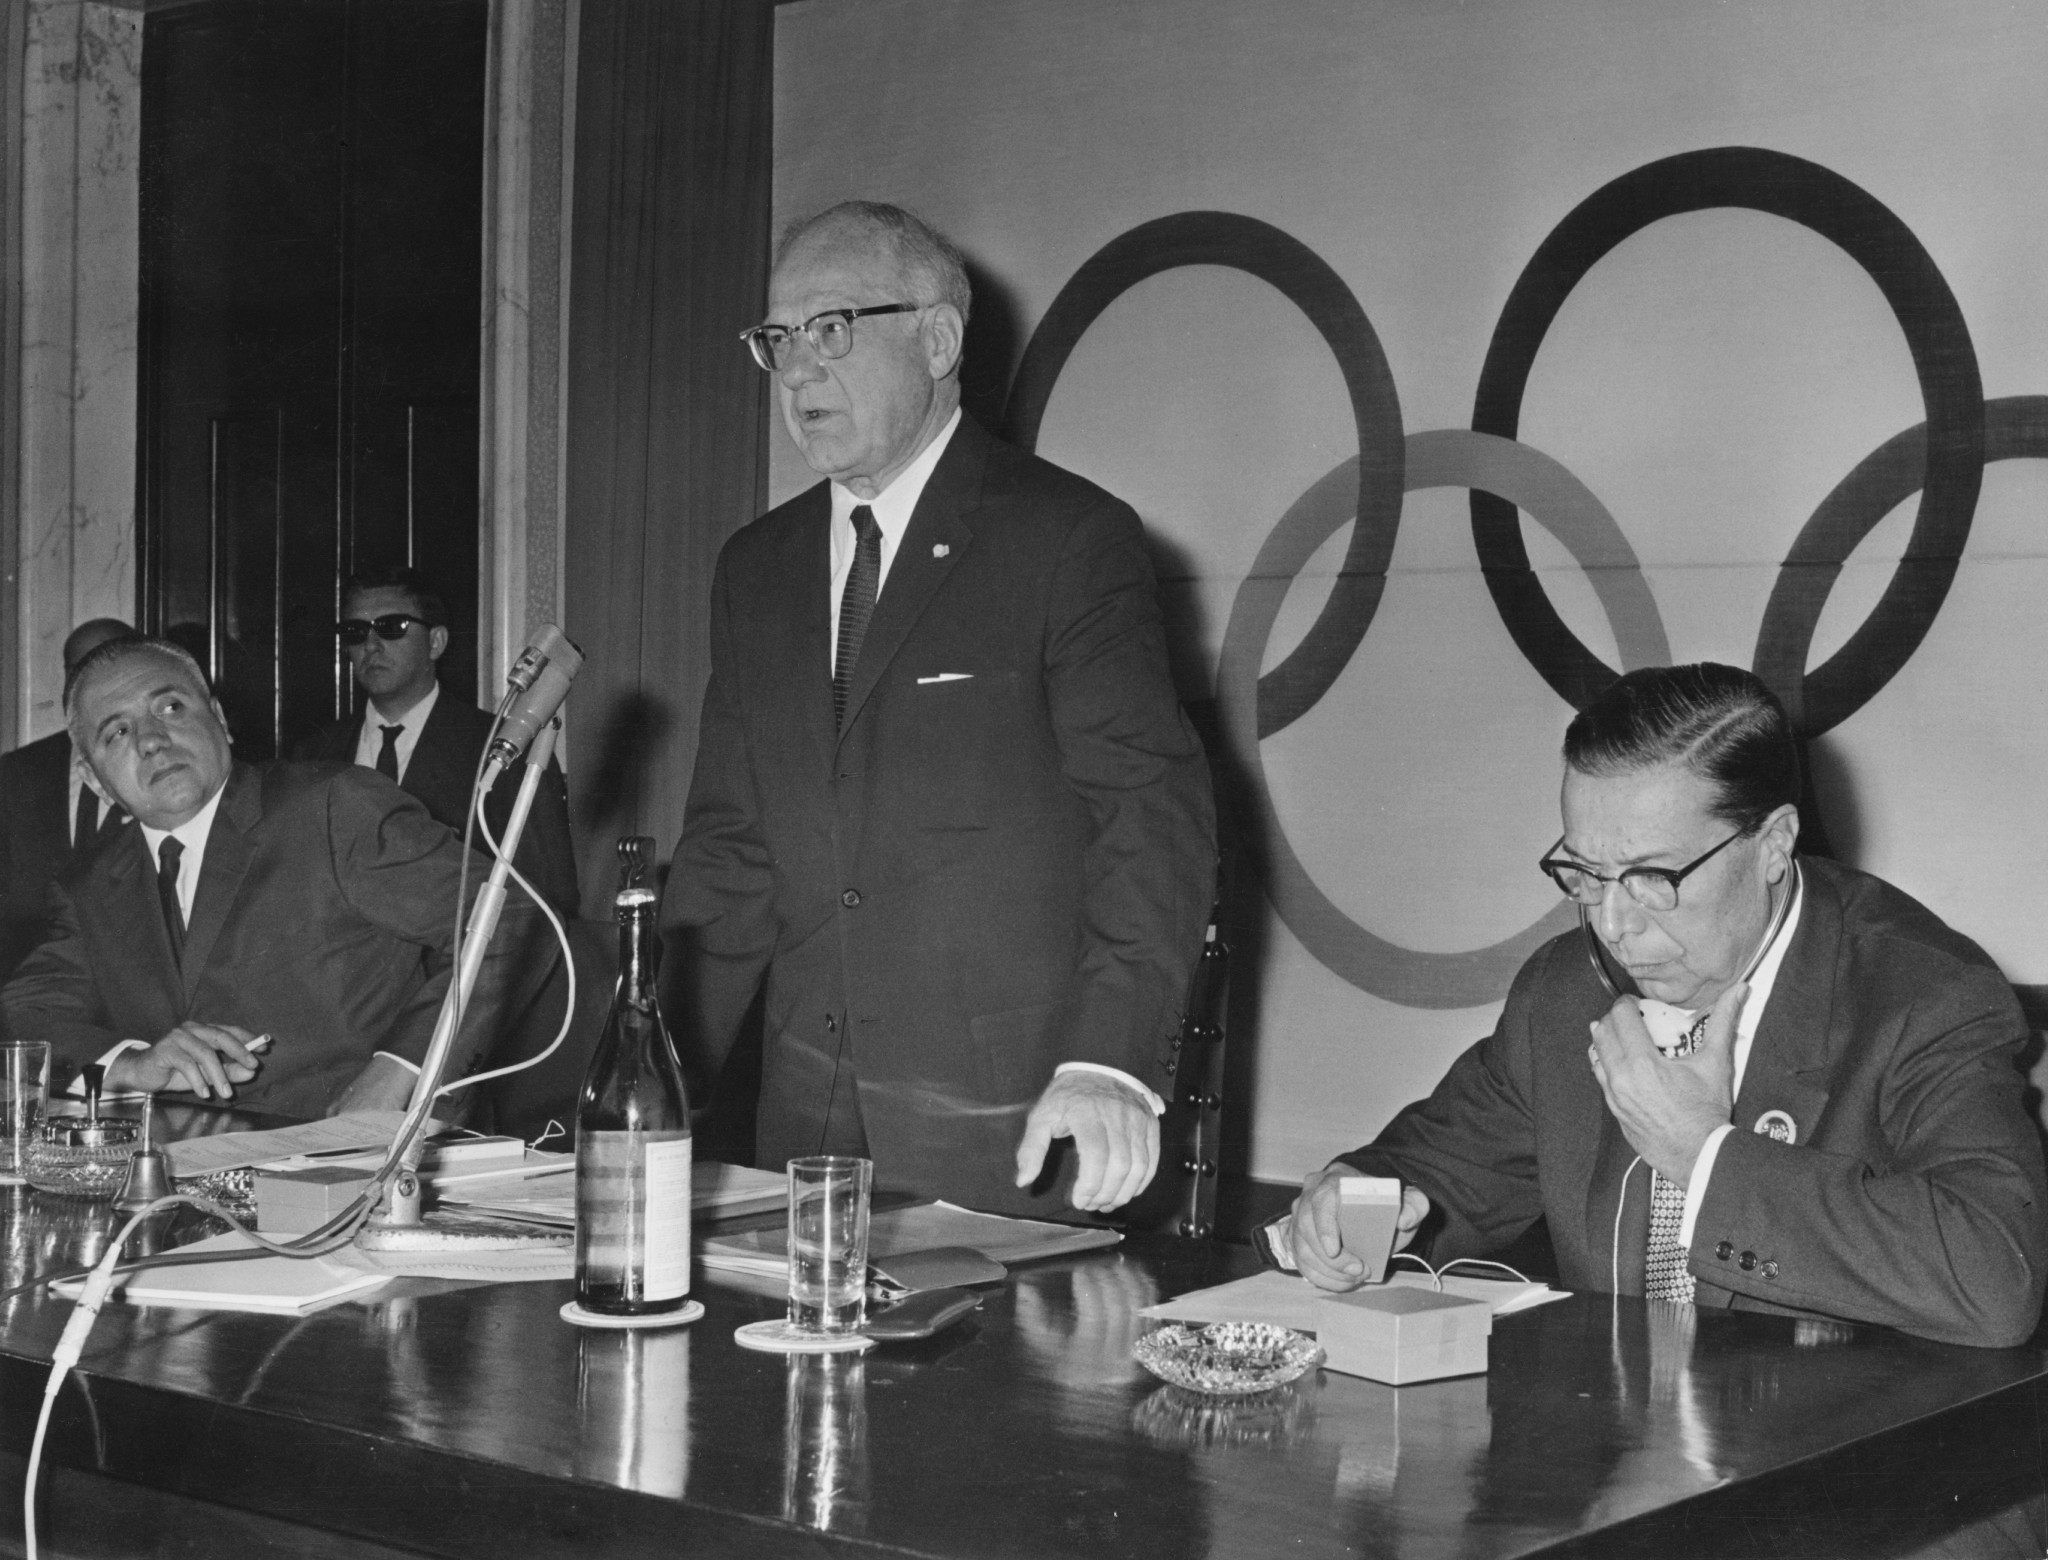 Avery Brundage, standing, was elected IOC President in 1952 and stayed in office for 20 years ©Getty Images